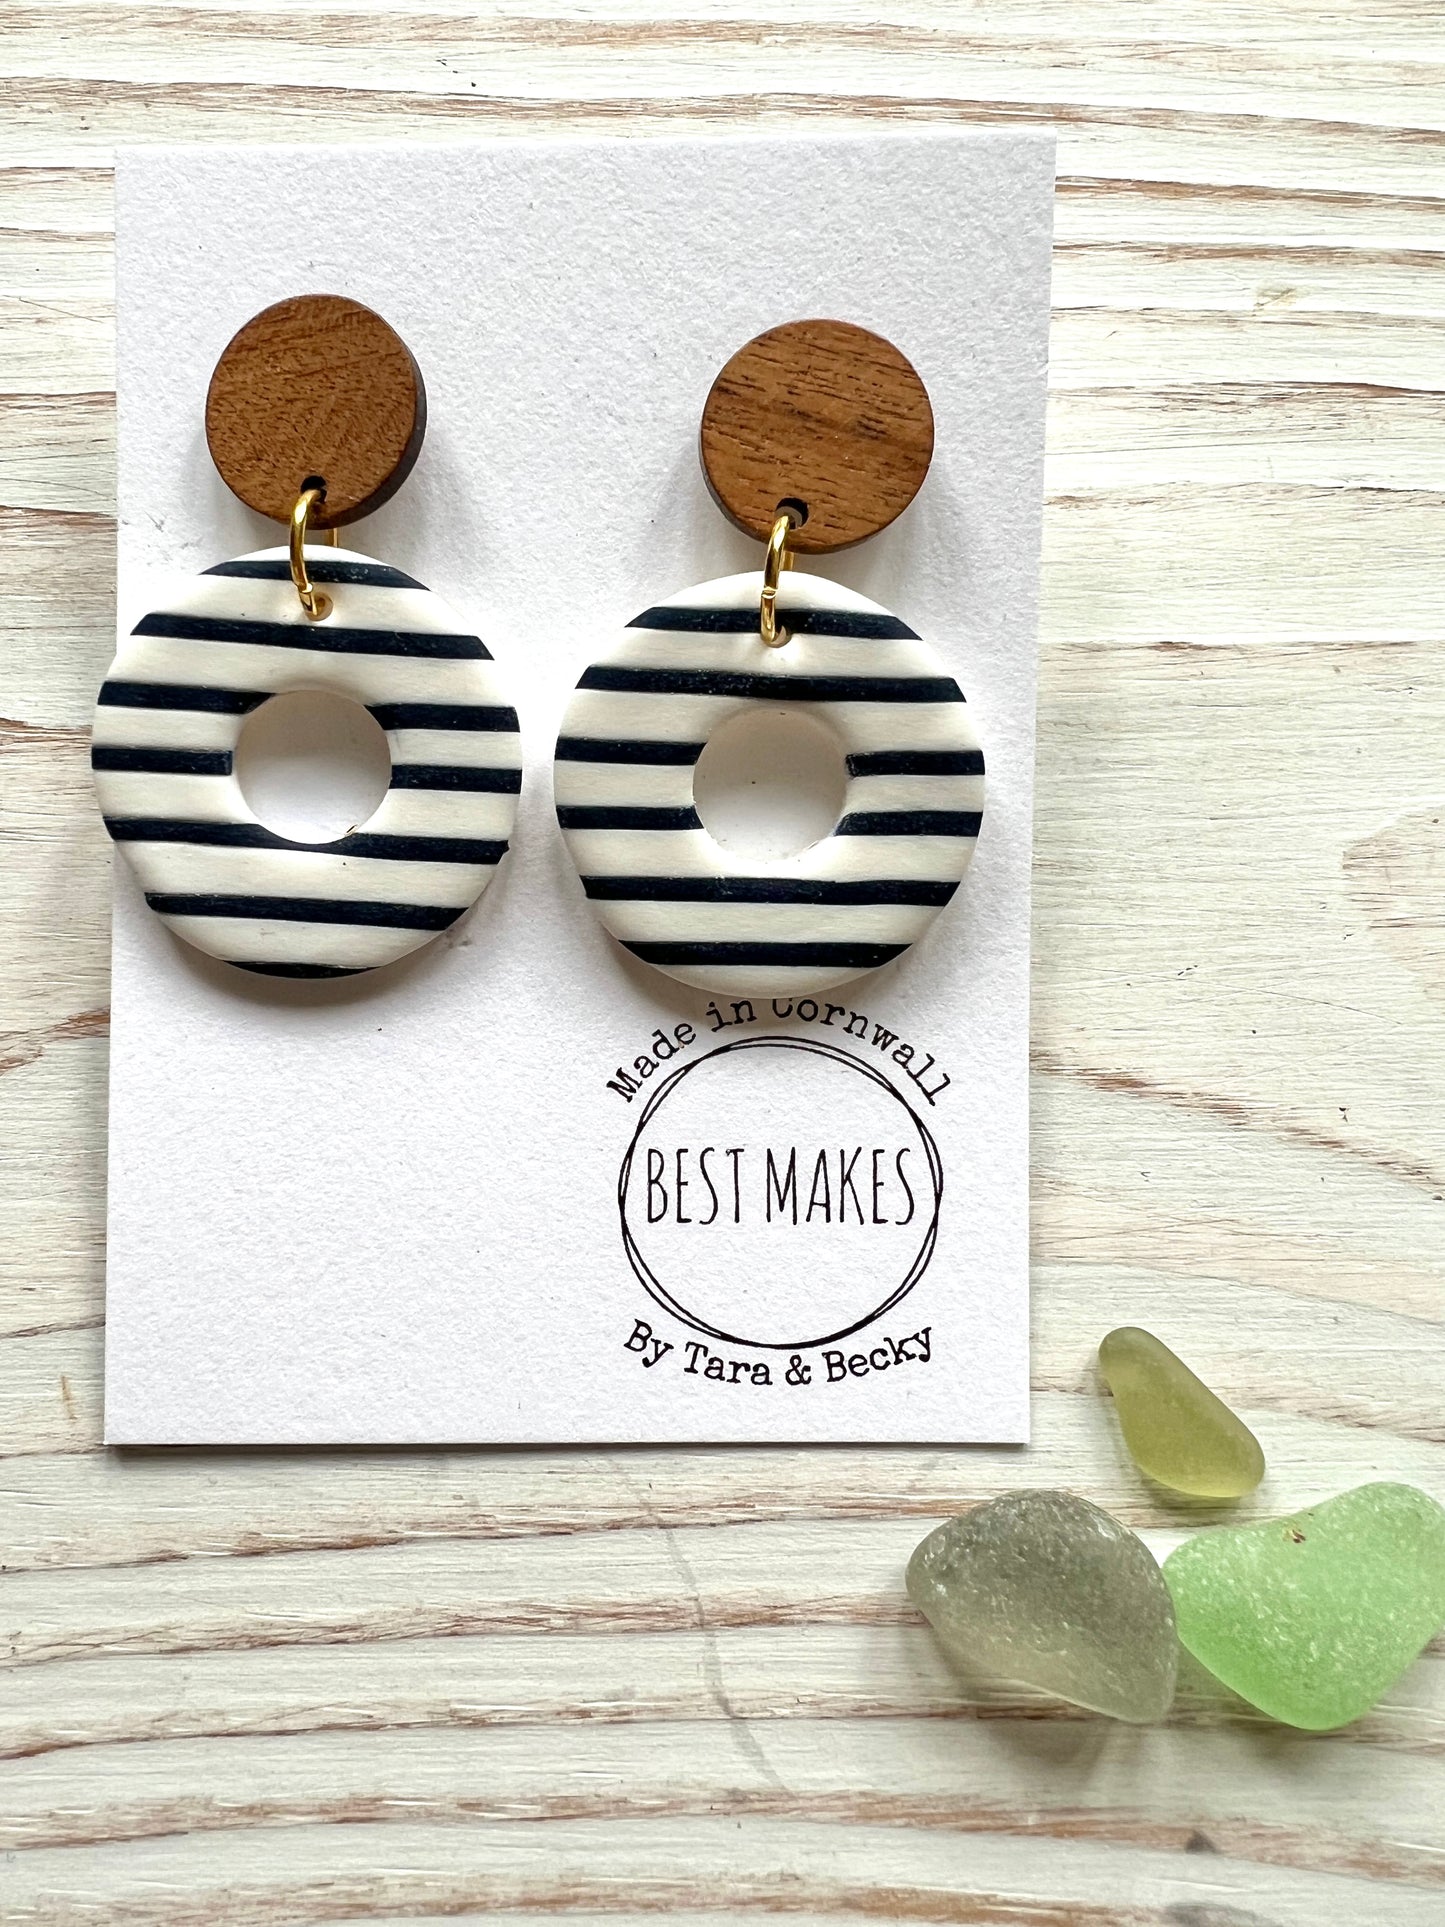 Handmade Statement Dangly Earrings by Best Makes